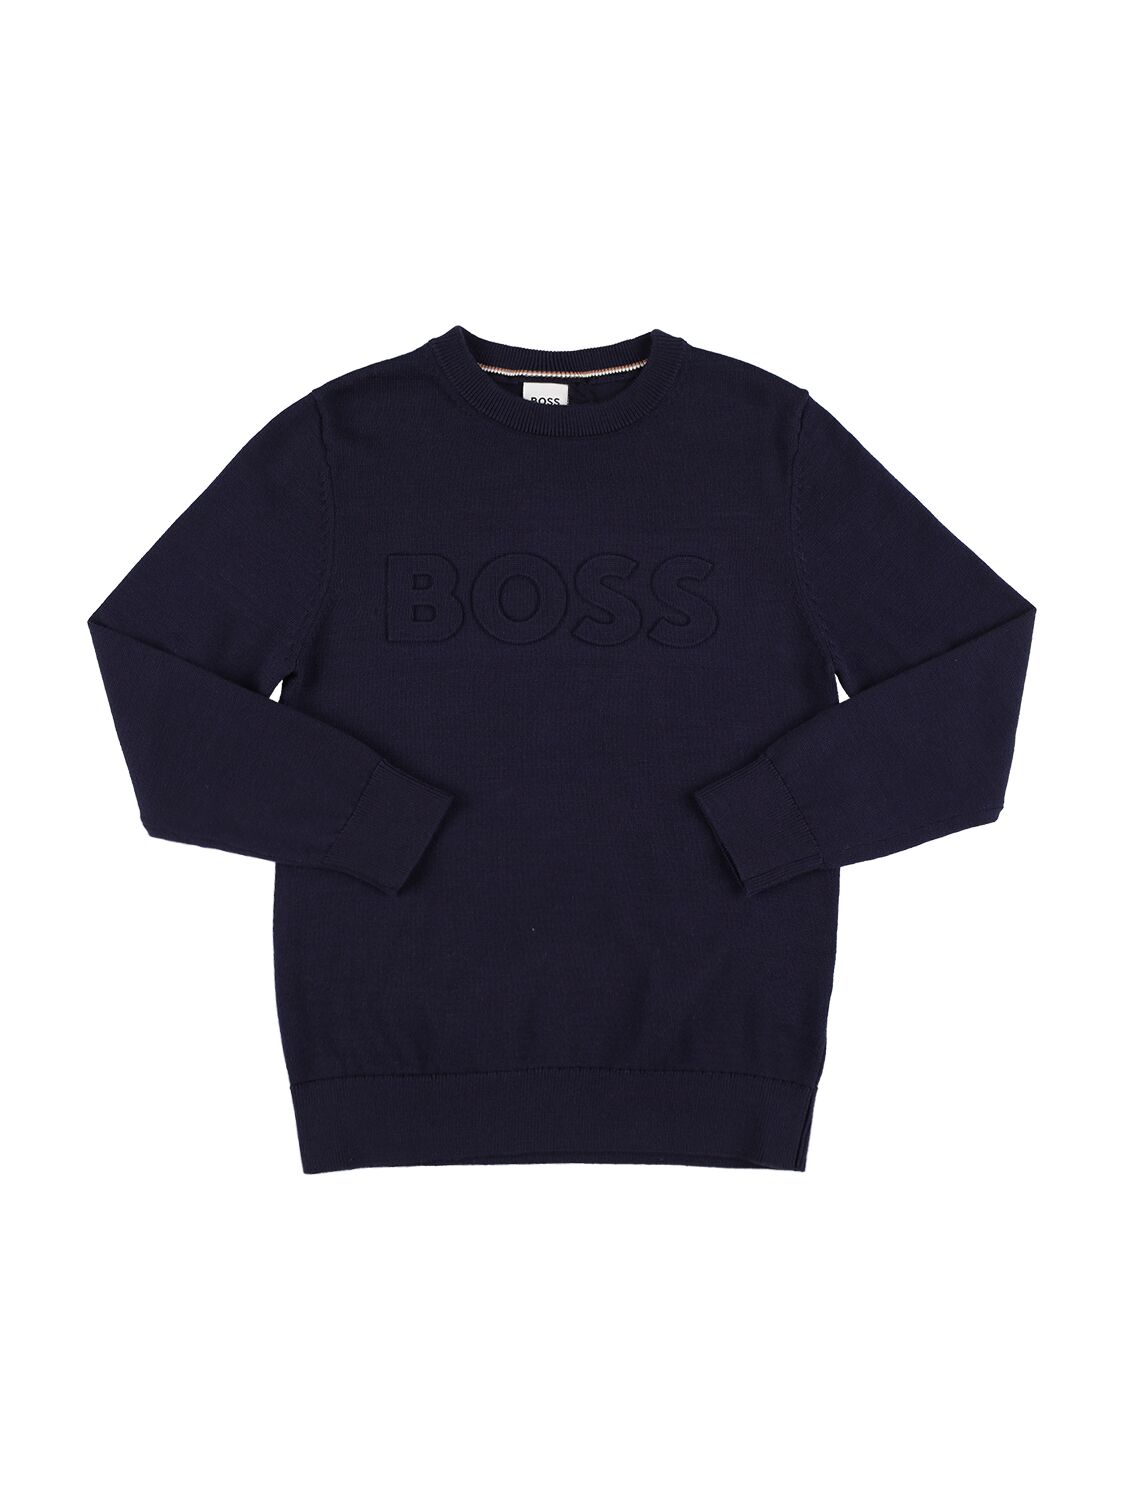 Image of Embossed Logo Cotton Knit Sweater